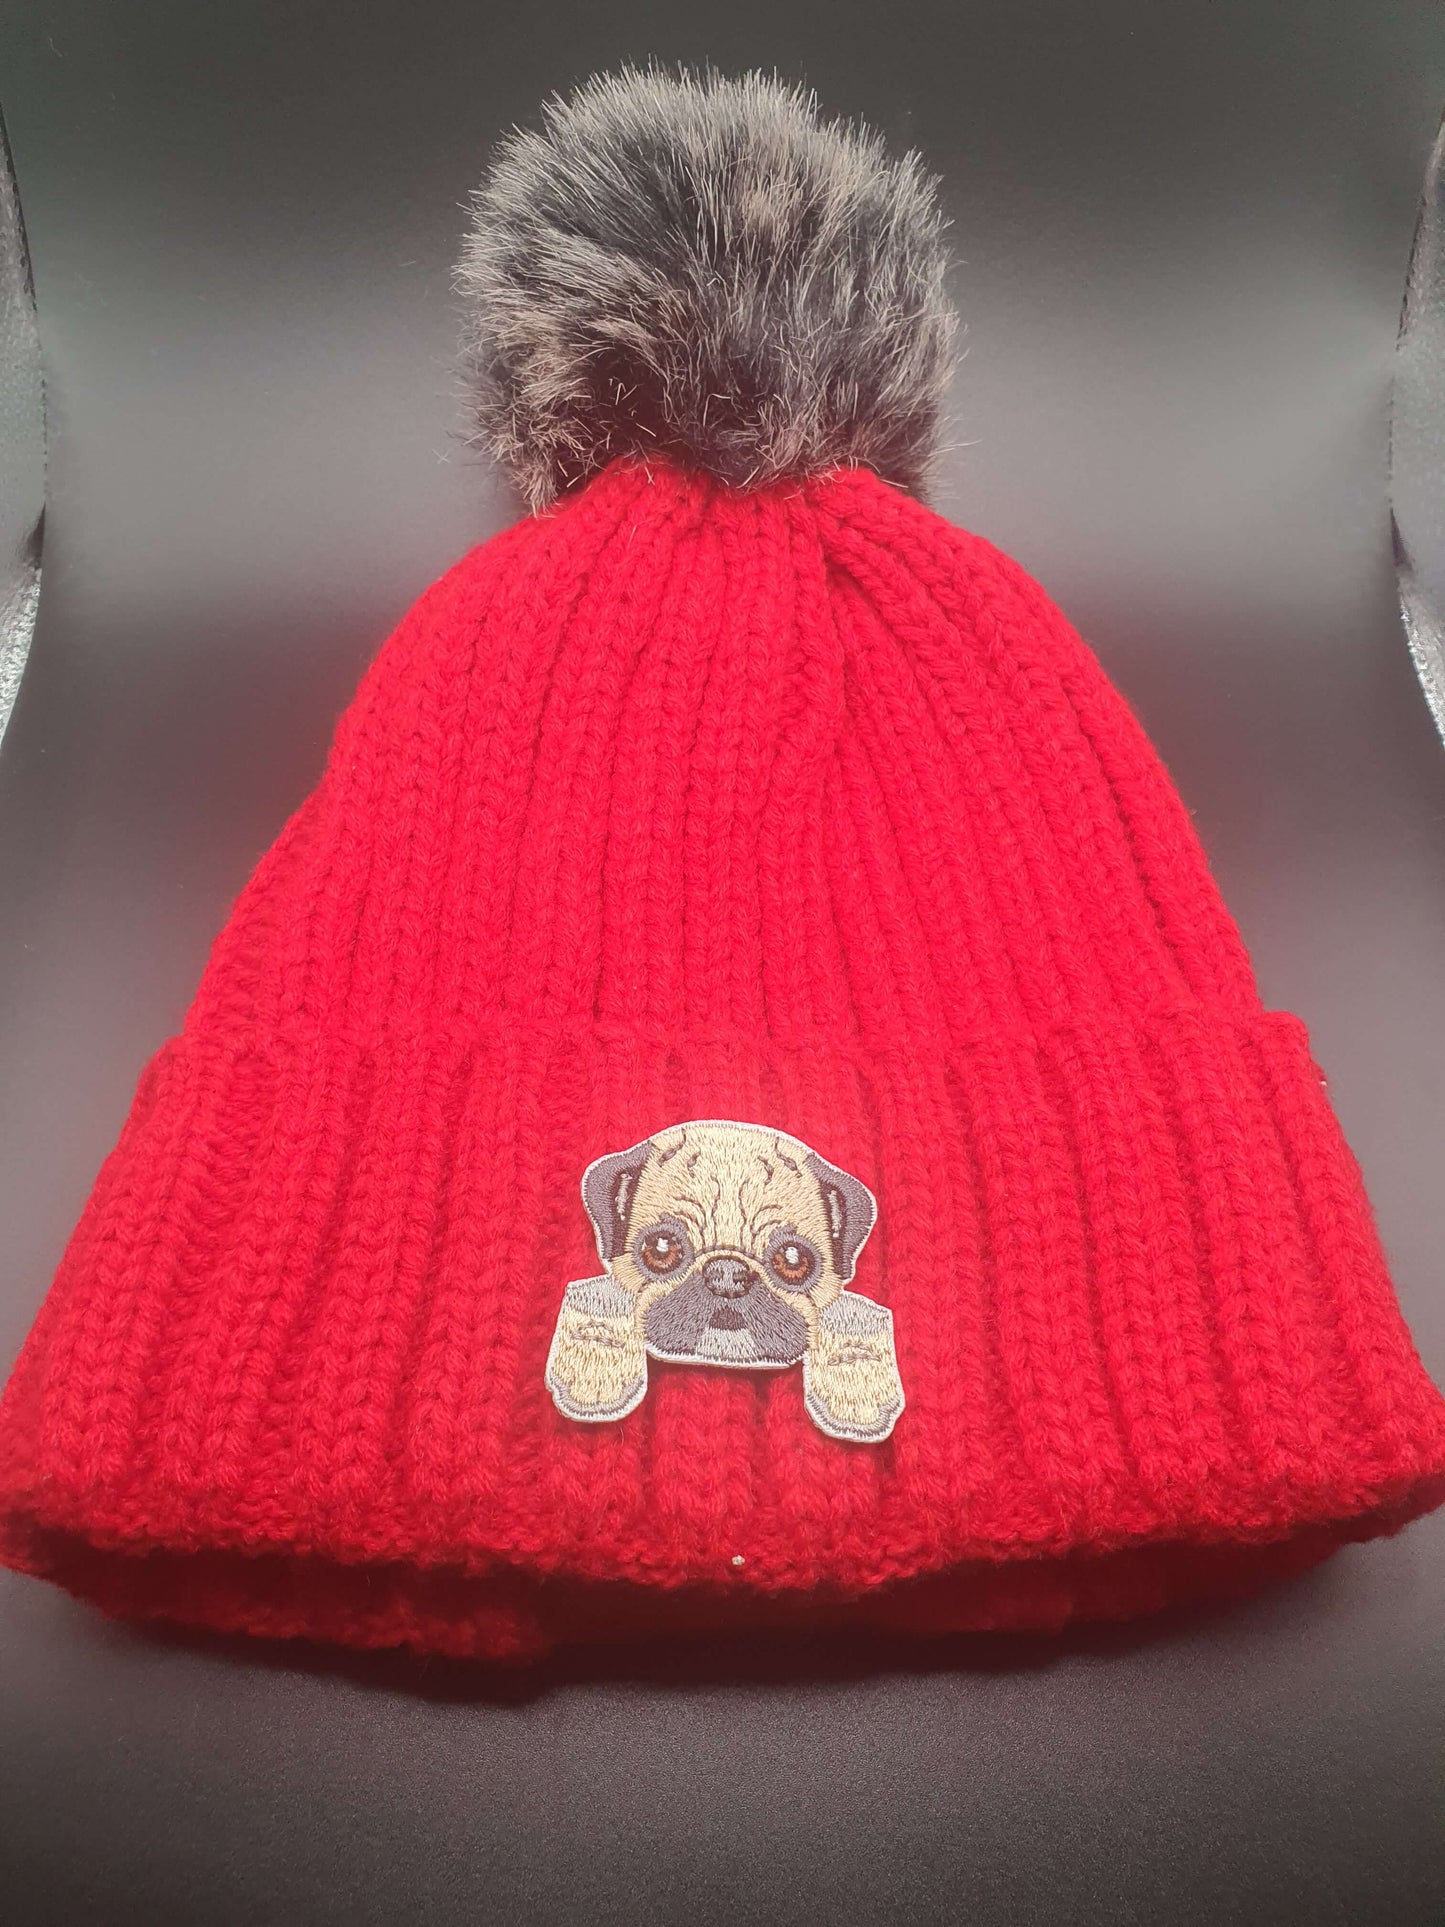 Dog Themed Knitted Beanies - Style's Bug Pug / Red